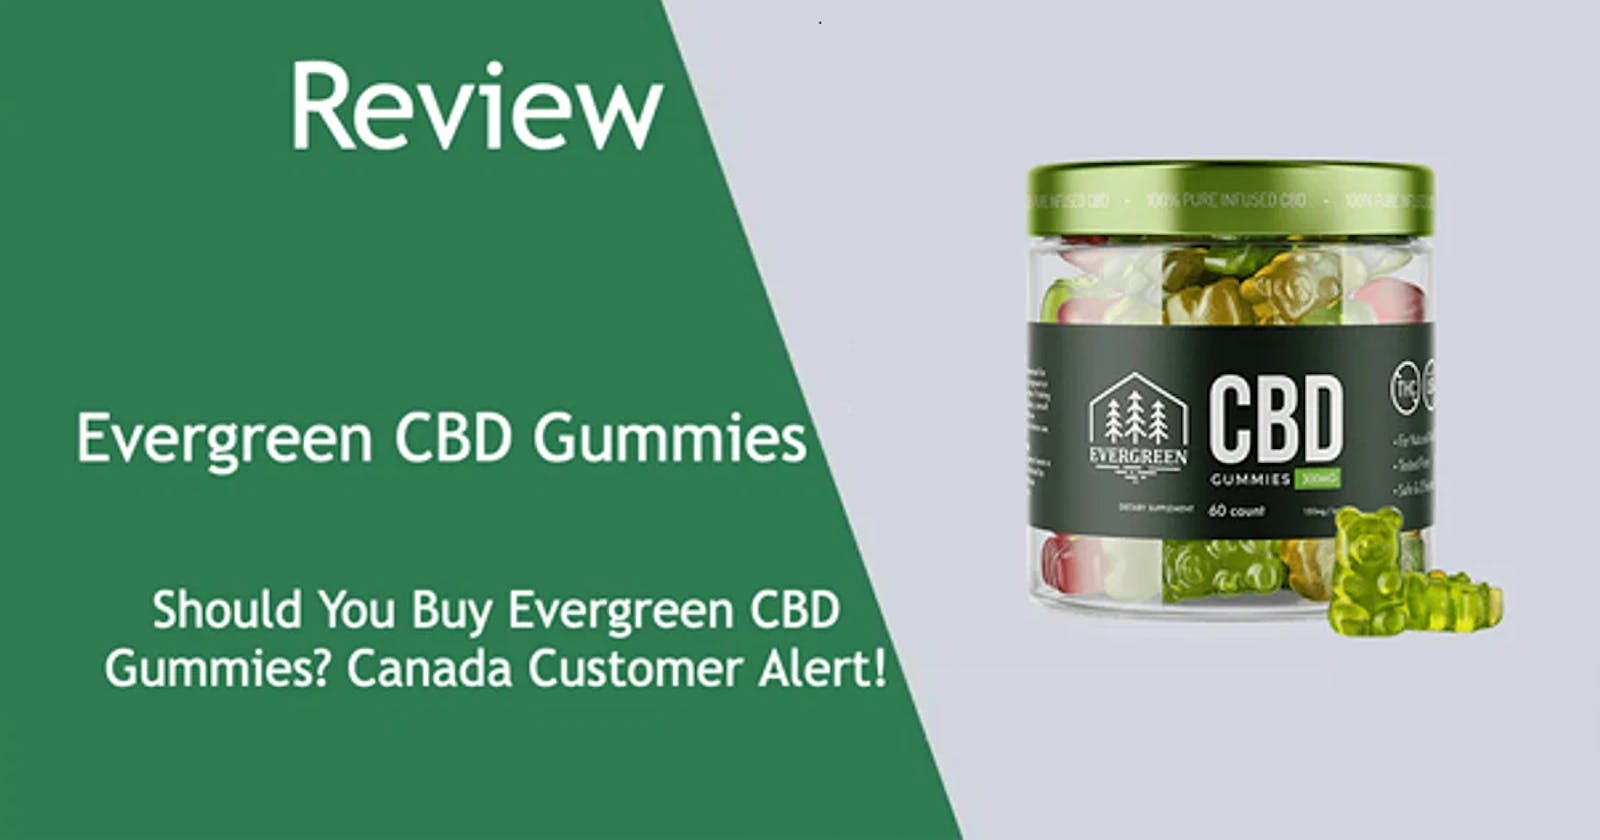 Evergreen CBD Gummies Canada: A Full-Spectrum CBD Supplement That Works Wonders for Your Health and Wellness